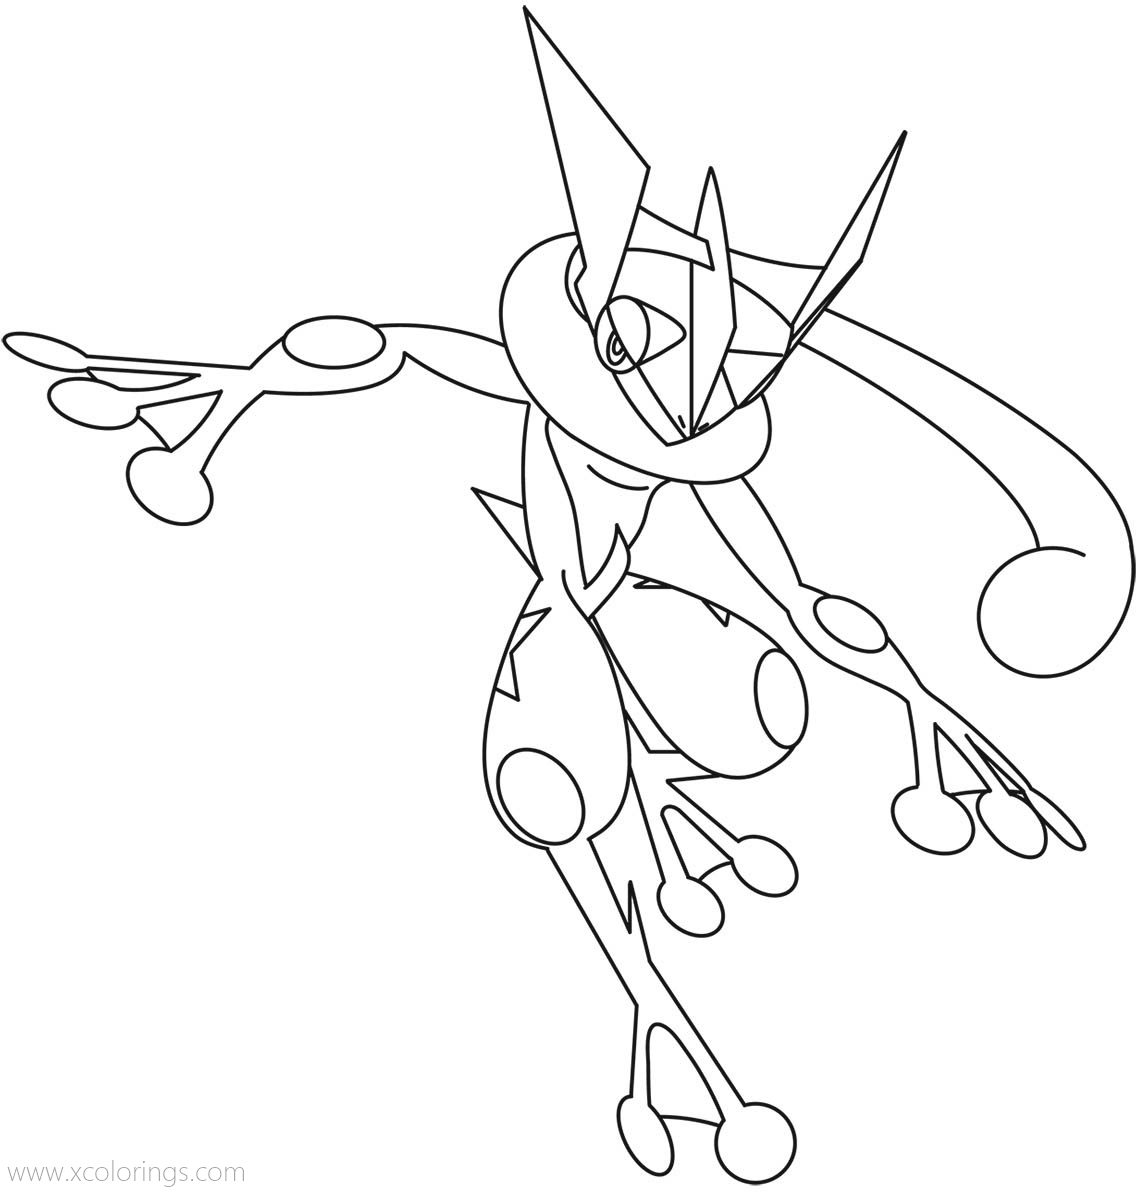 Greninja Pokemon Coloring Page Pokemon Coloring Pages Pokemon The Best Porn Website